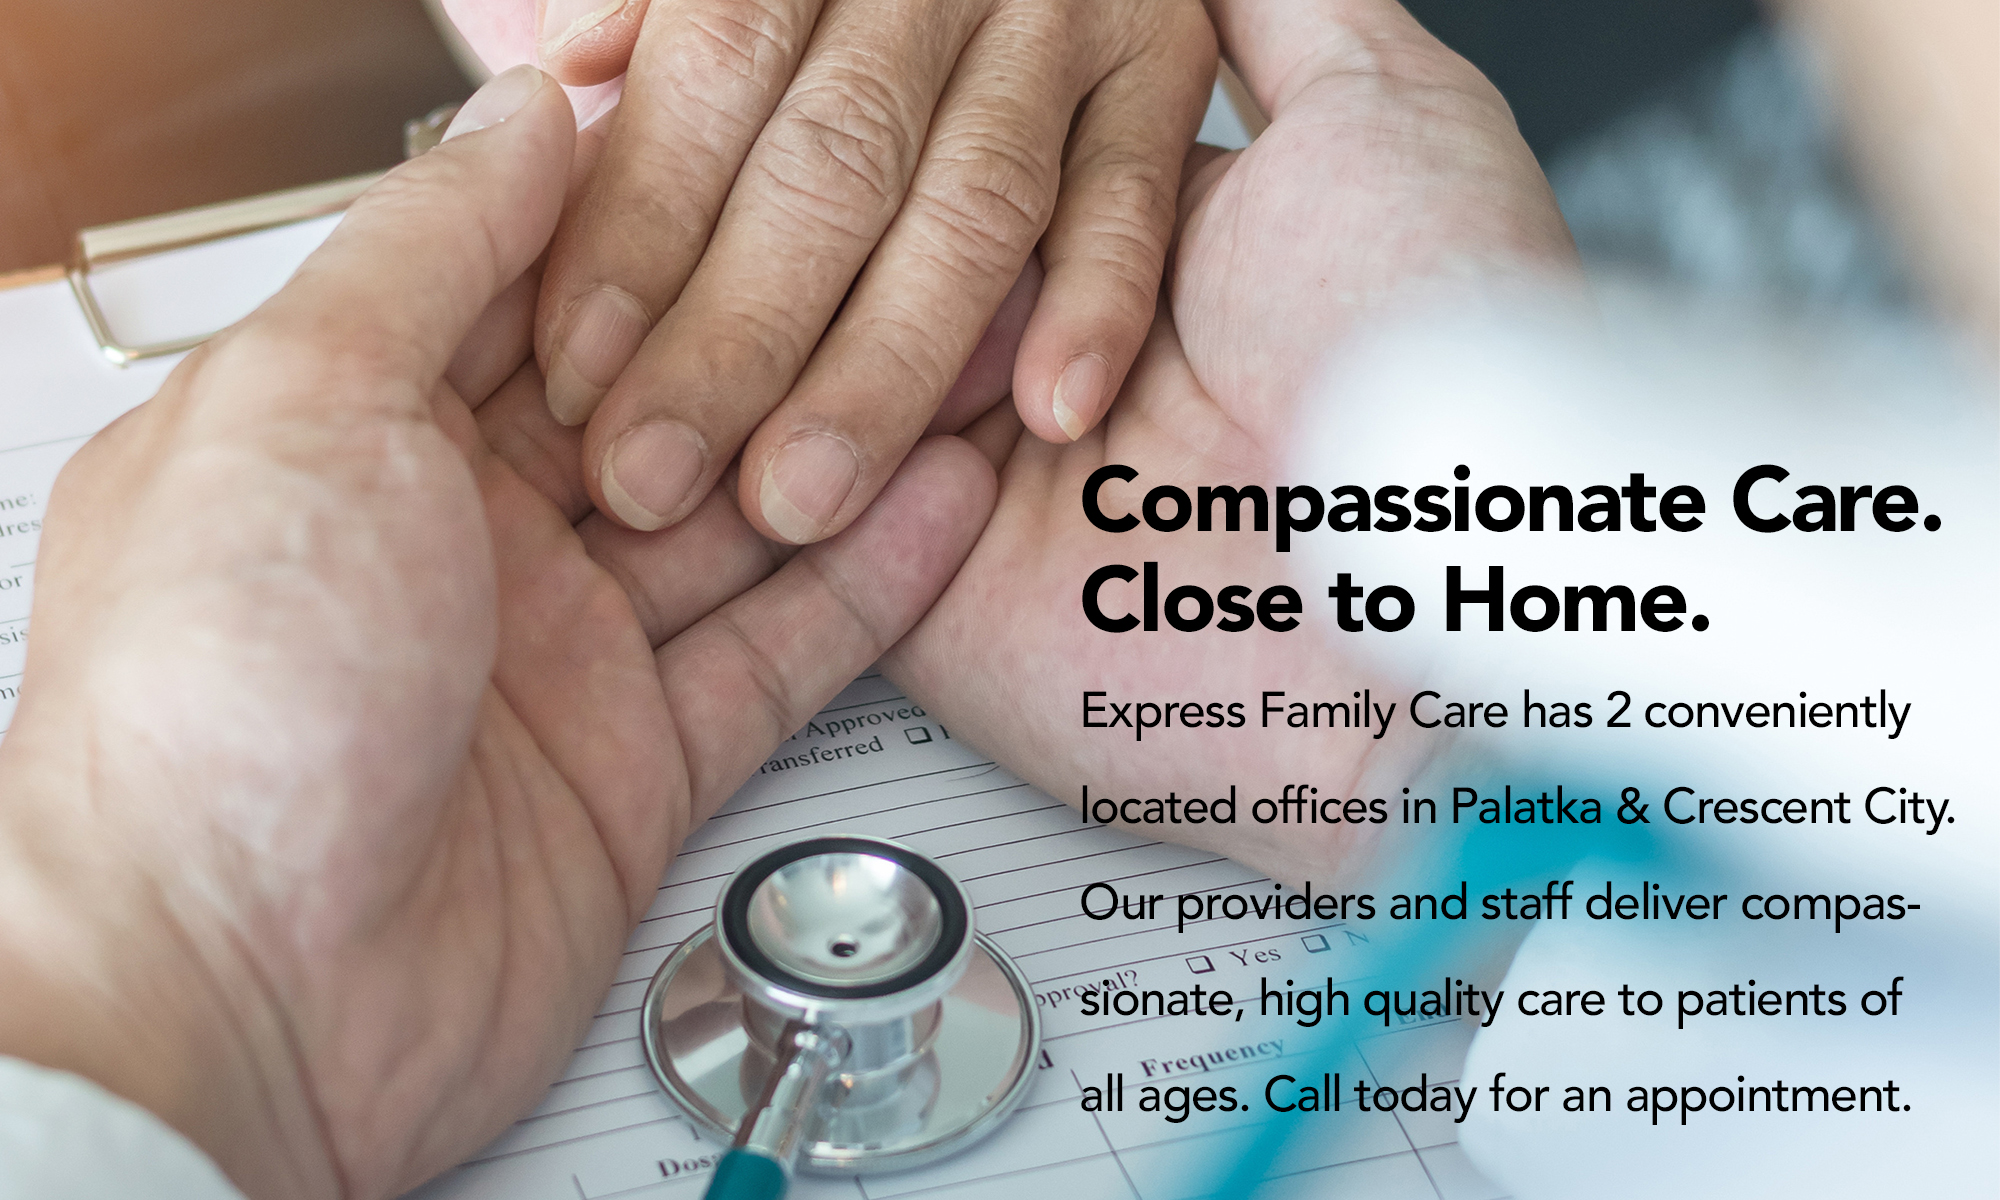 Compassionate Care and Close to Home